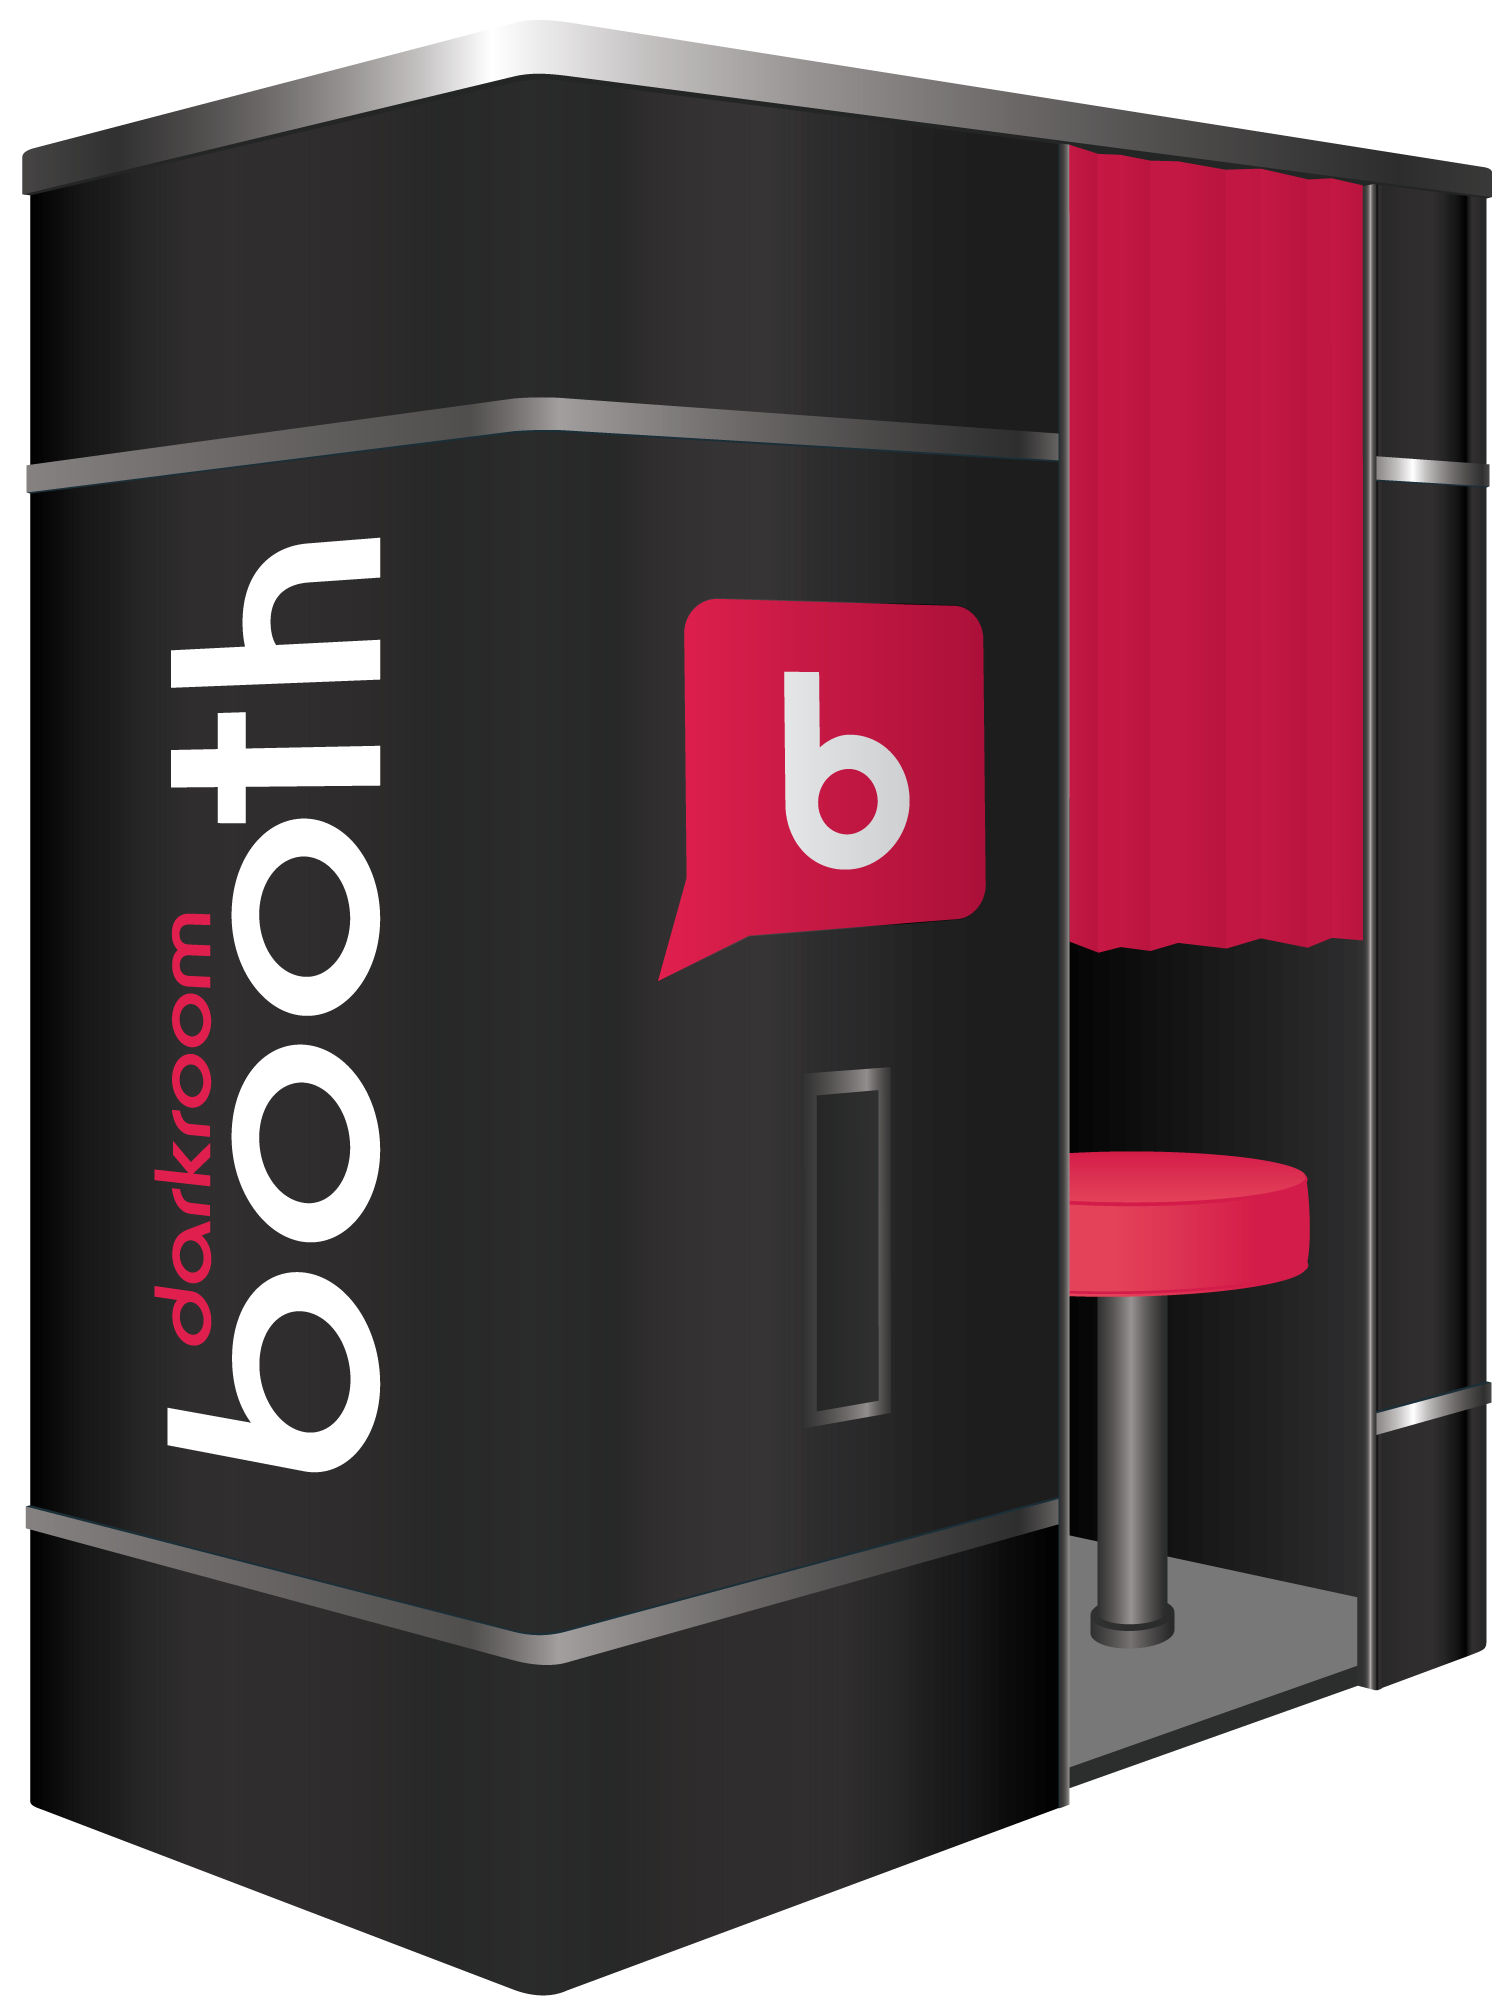 Darkroom Booth photo booth software